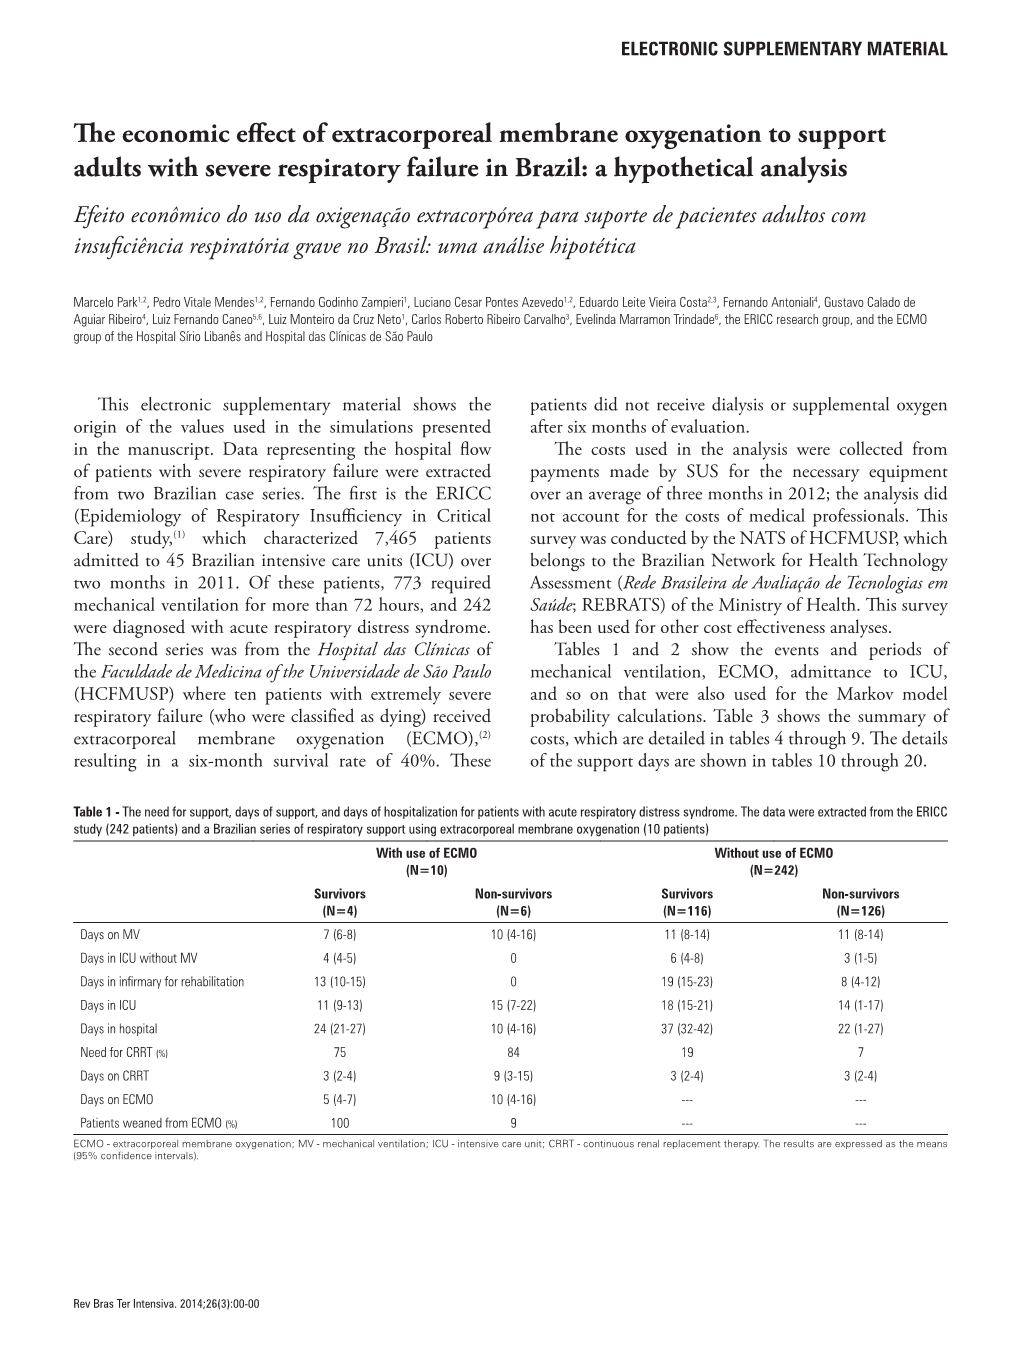 The Economic Effect of Extracorporeal Membrane Oxygenation to Support